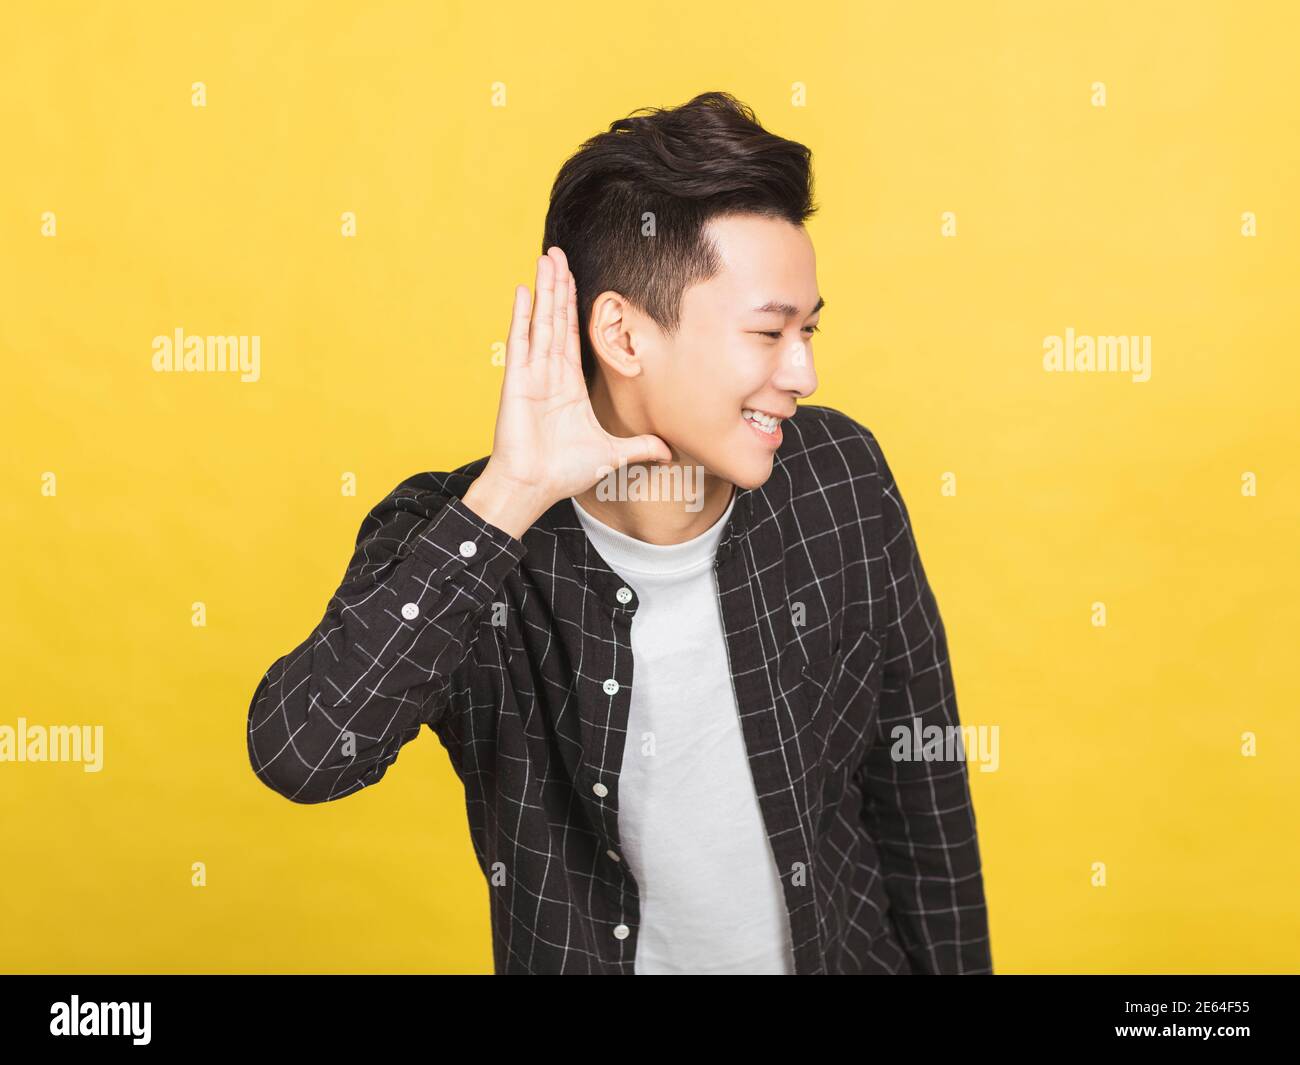 smiling young man hand over ear listening an hearing to rumor or gossip Stock Photo